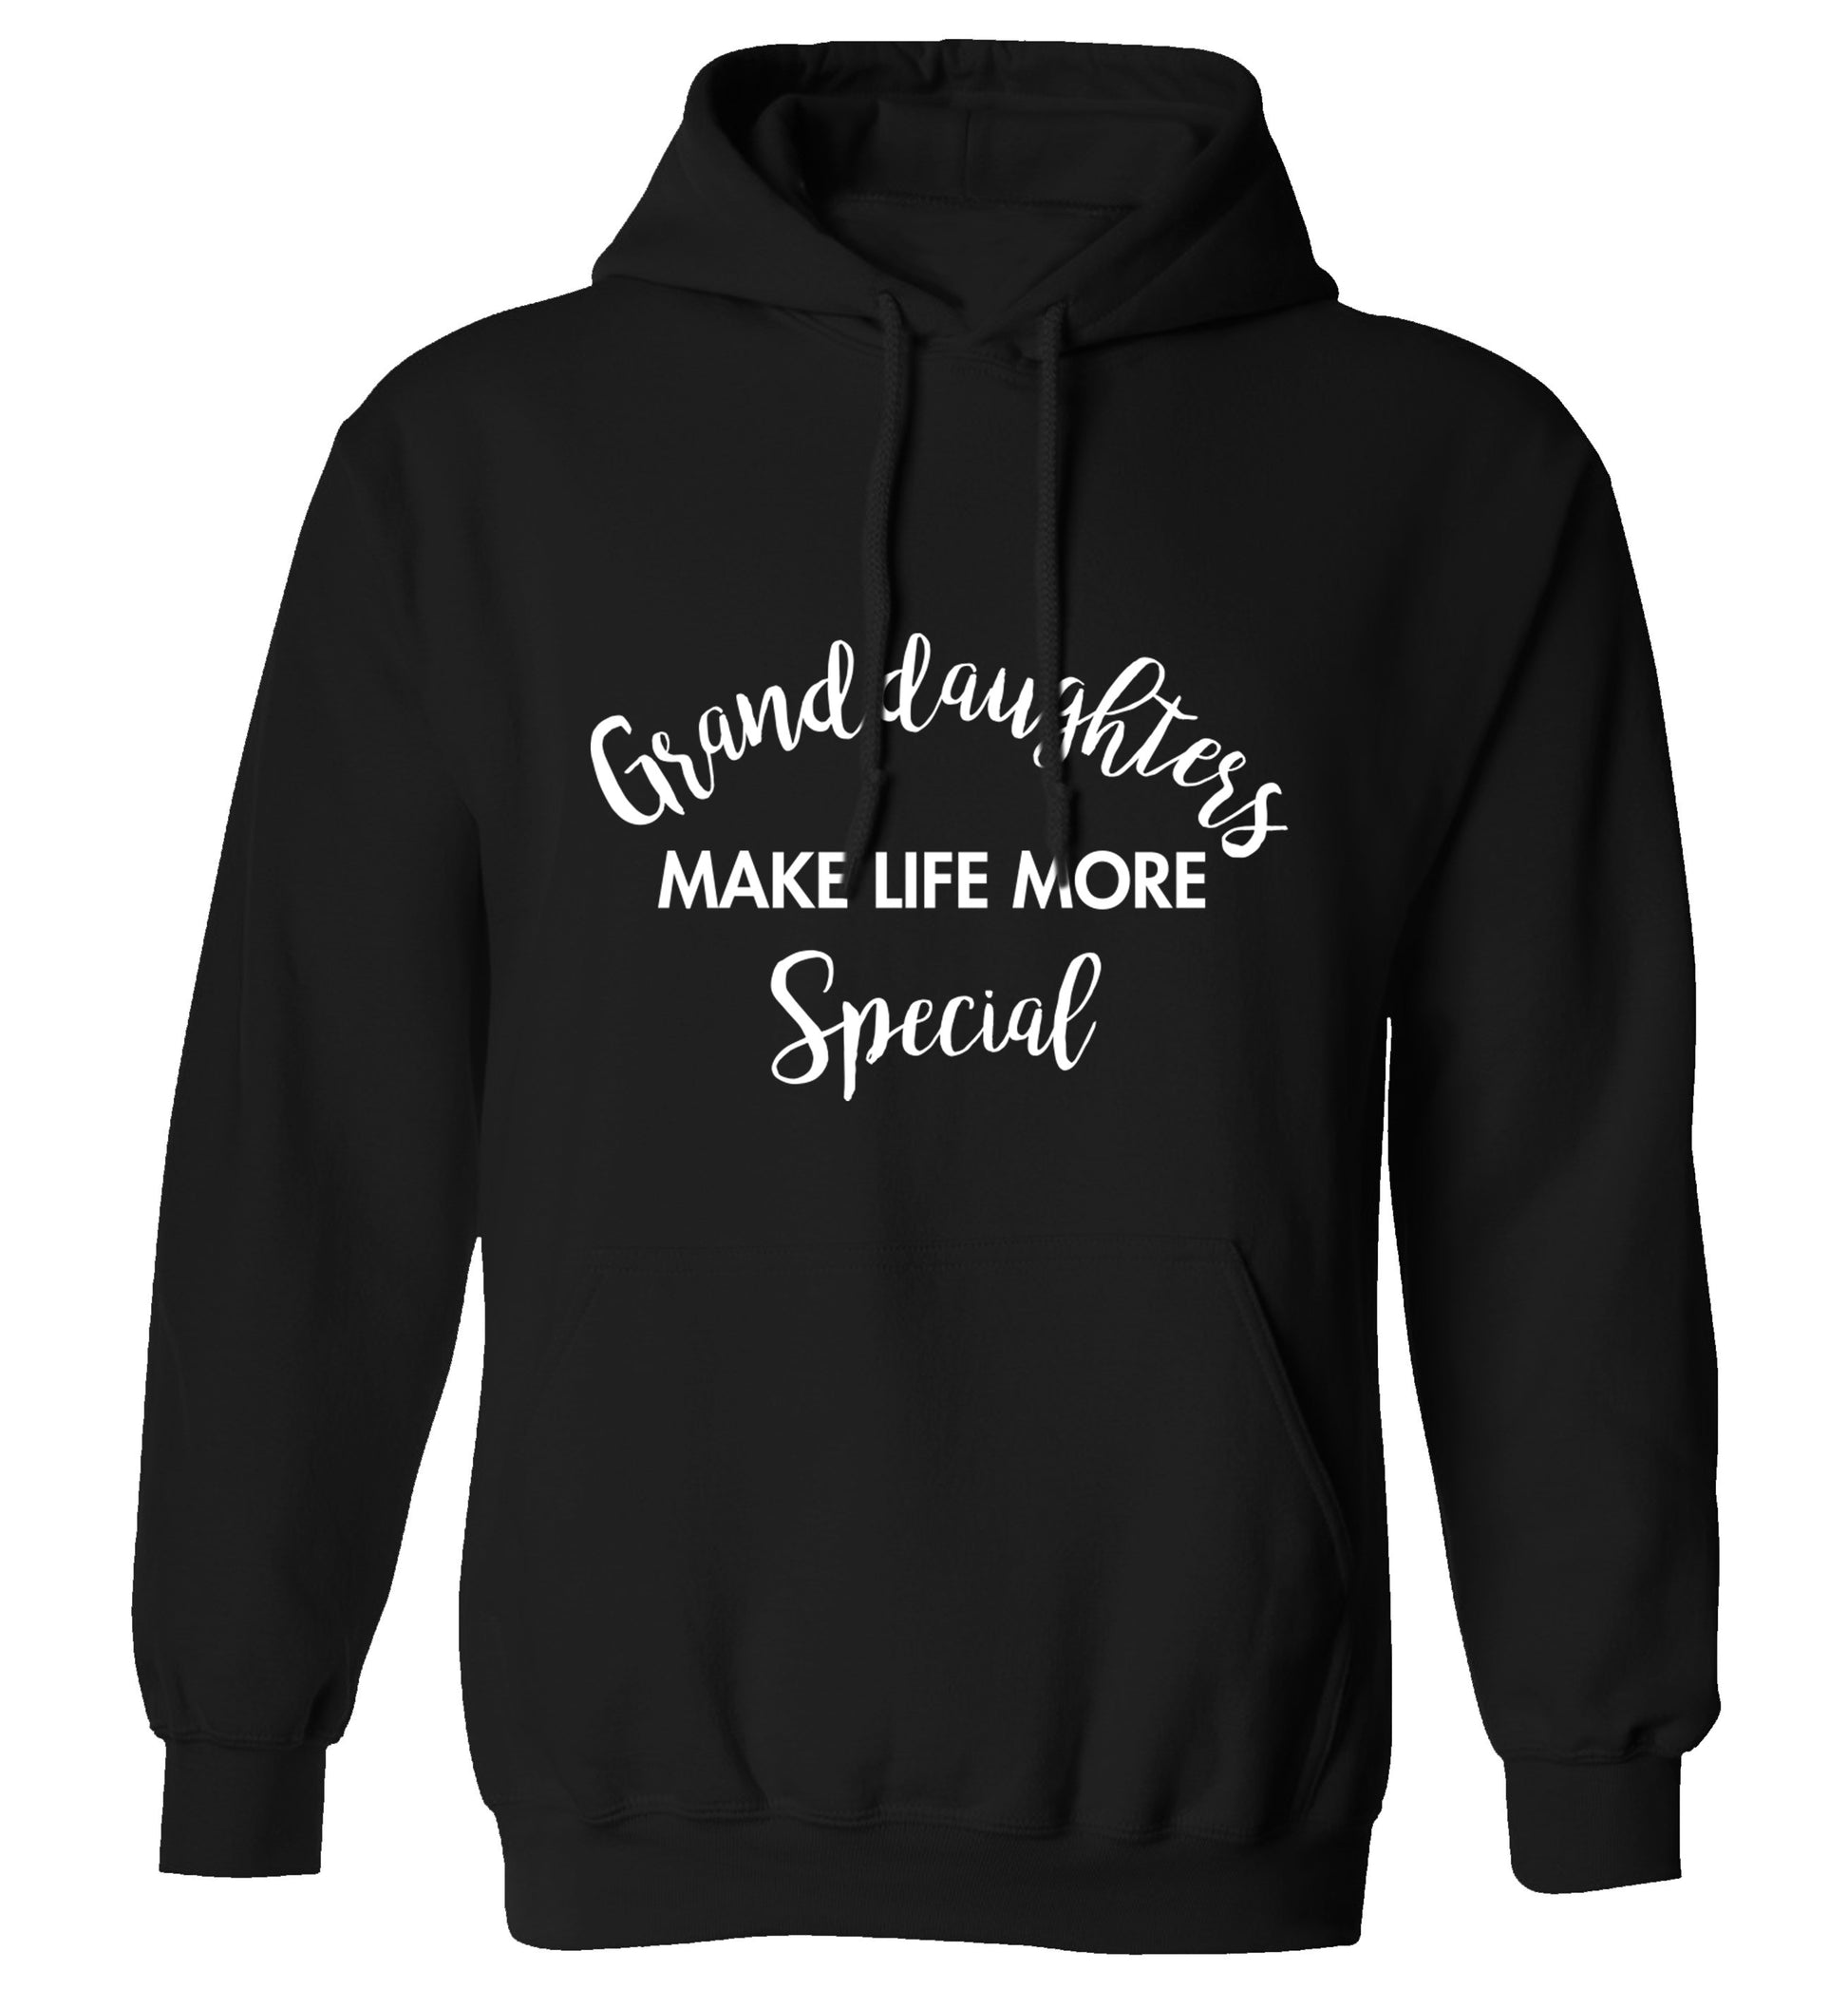 Granddaughters make life more special adults unisex black hoodie 2XL